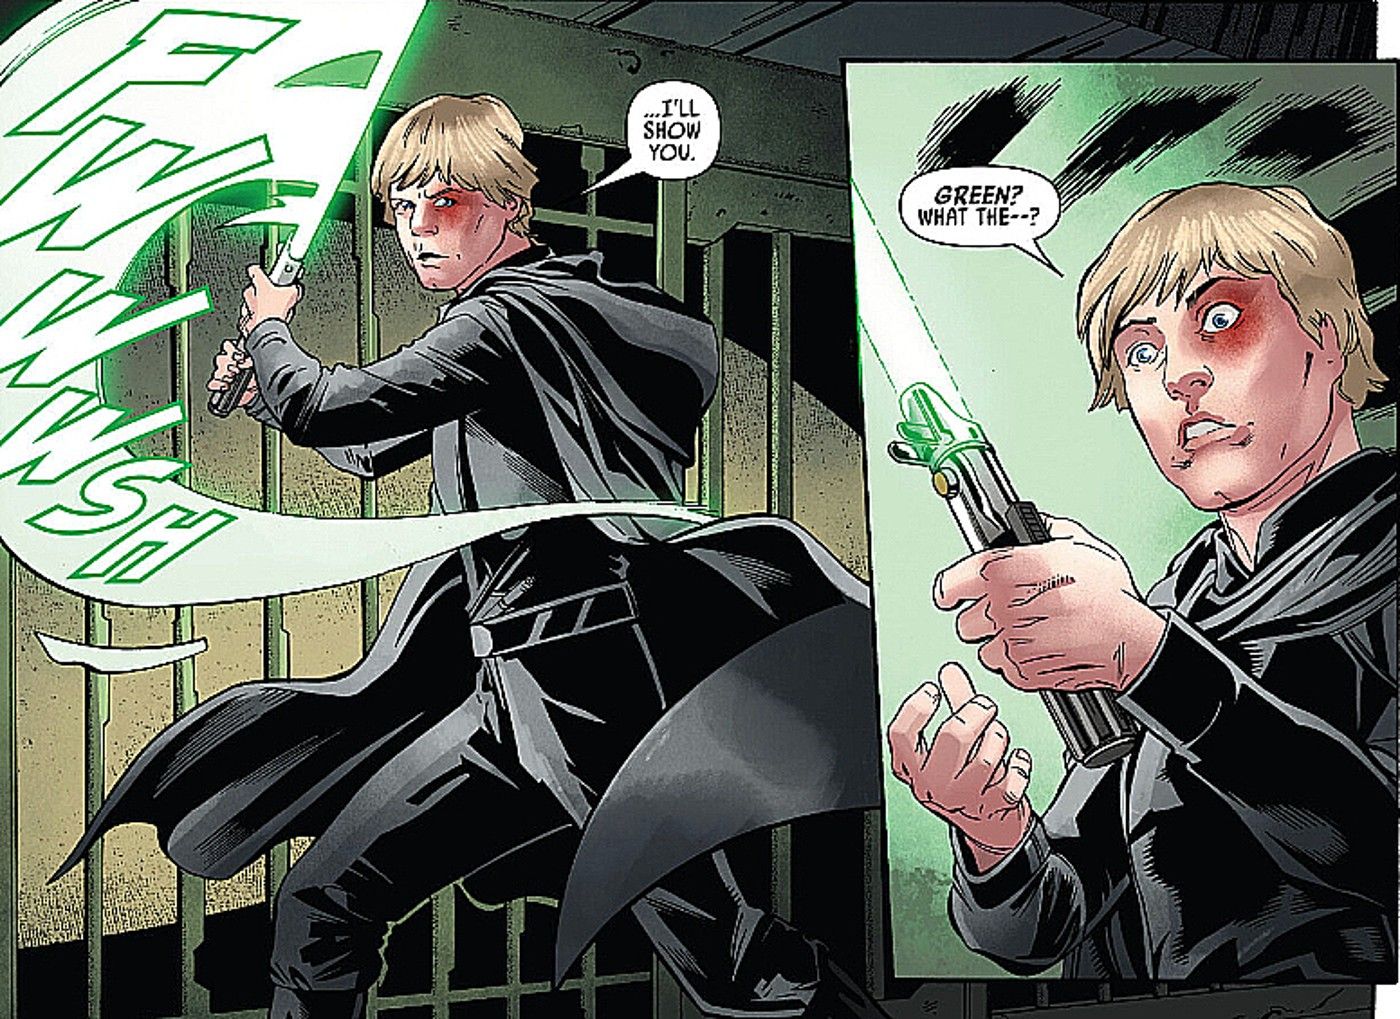 Star Wars #43, Luke Skywalker is surprised when his saber ignites with a green blade